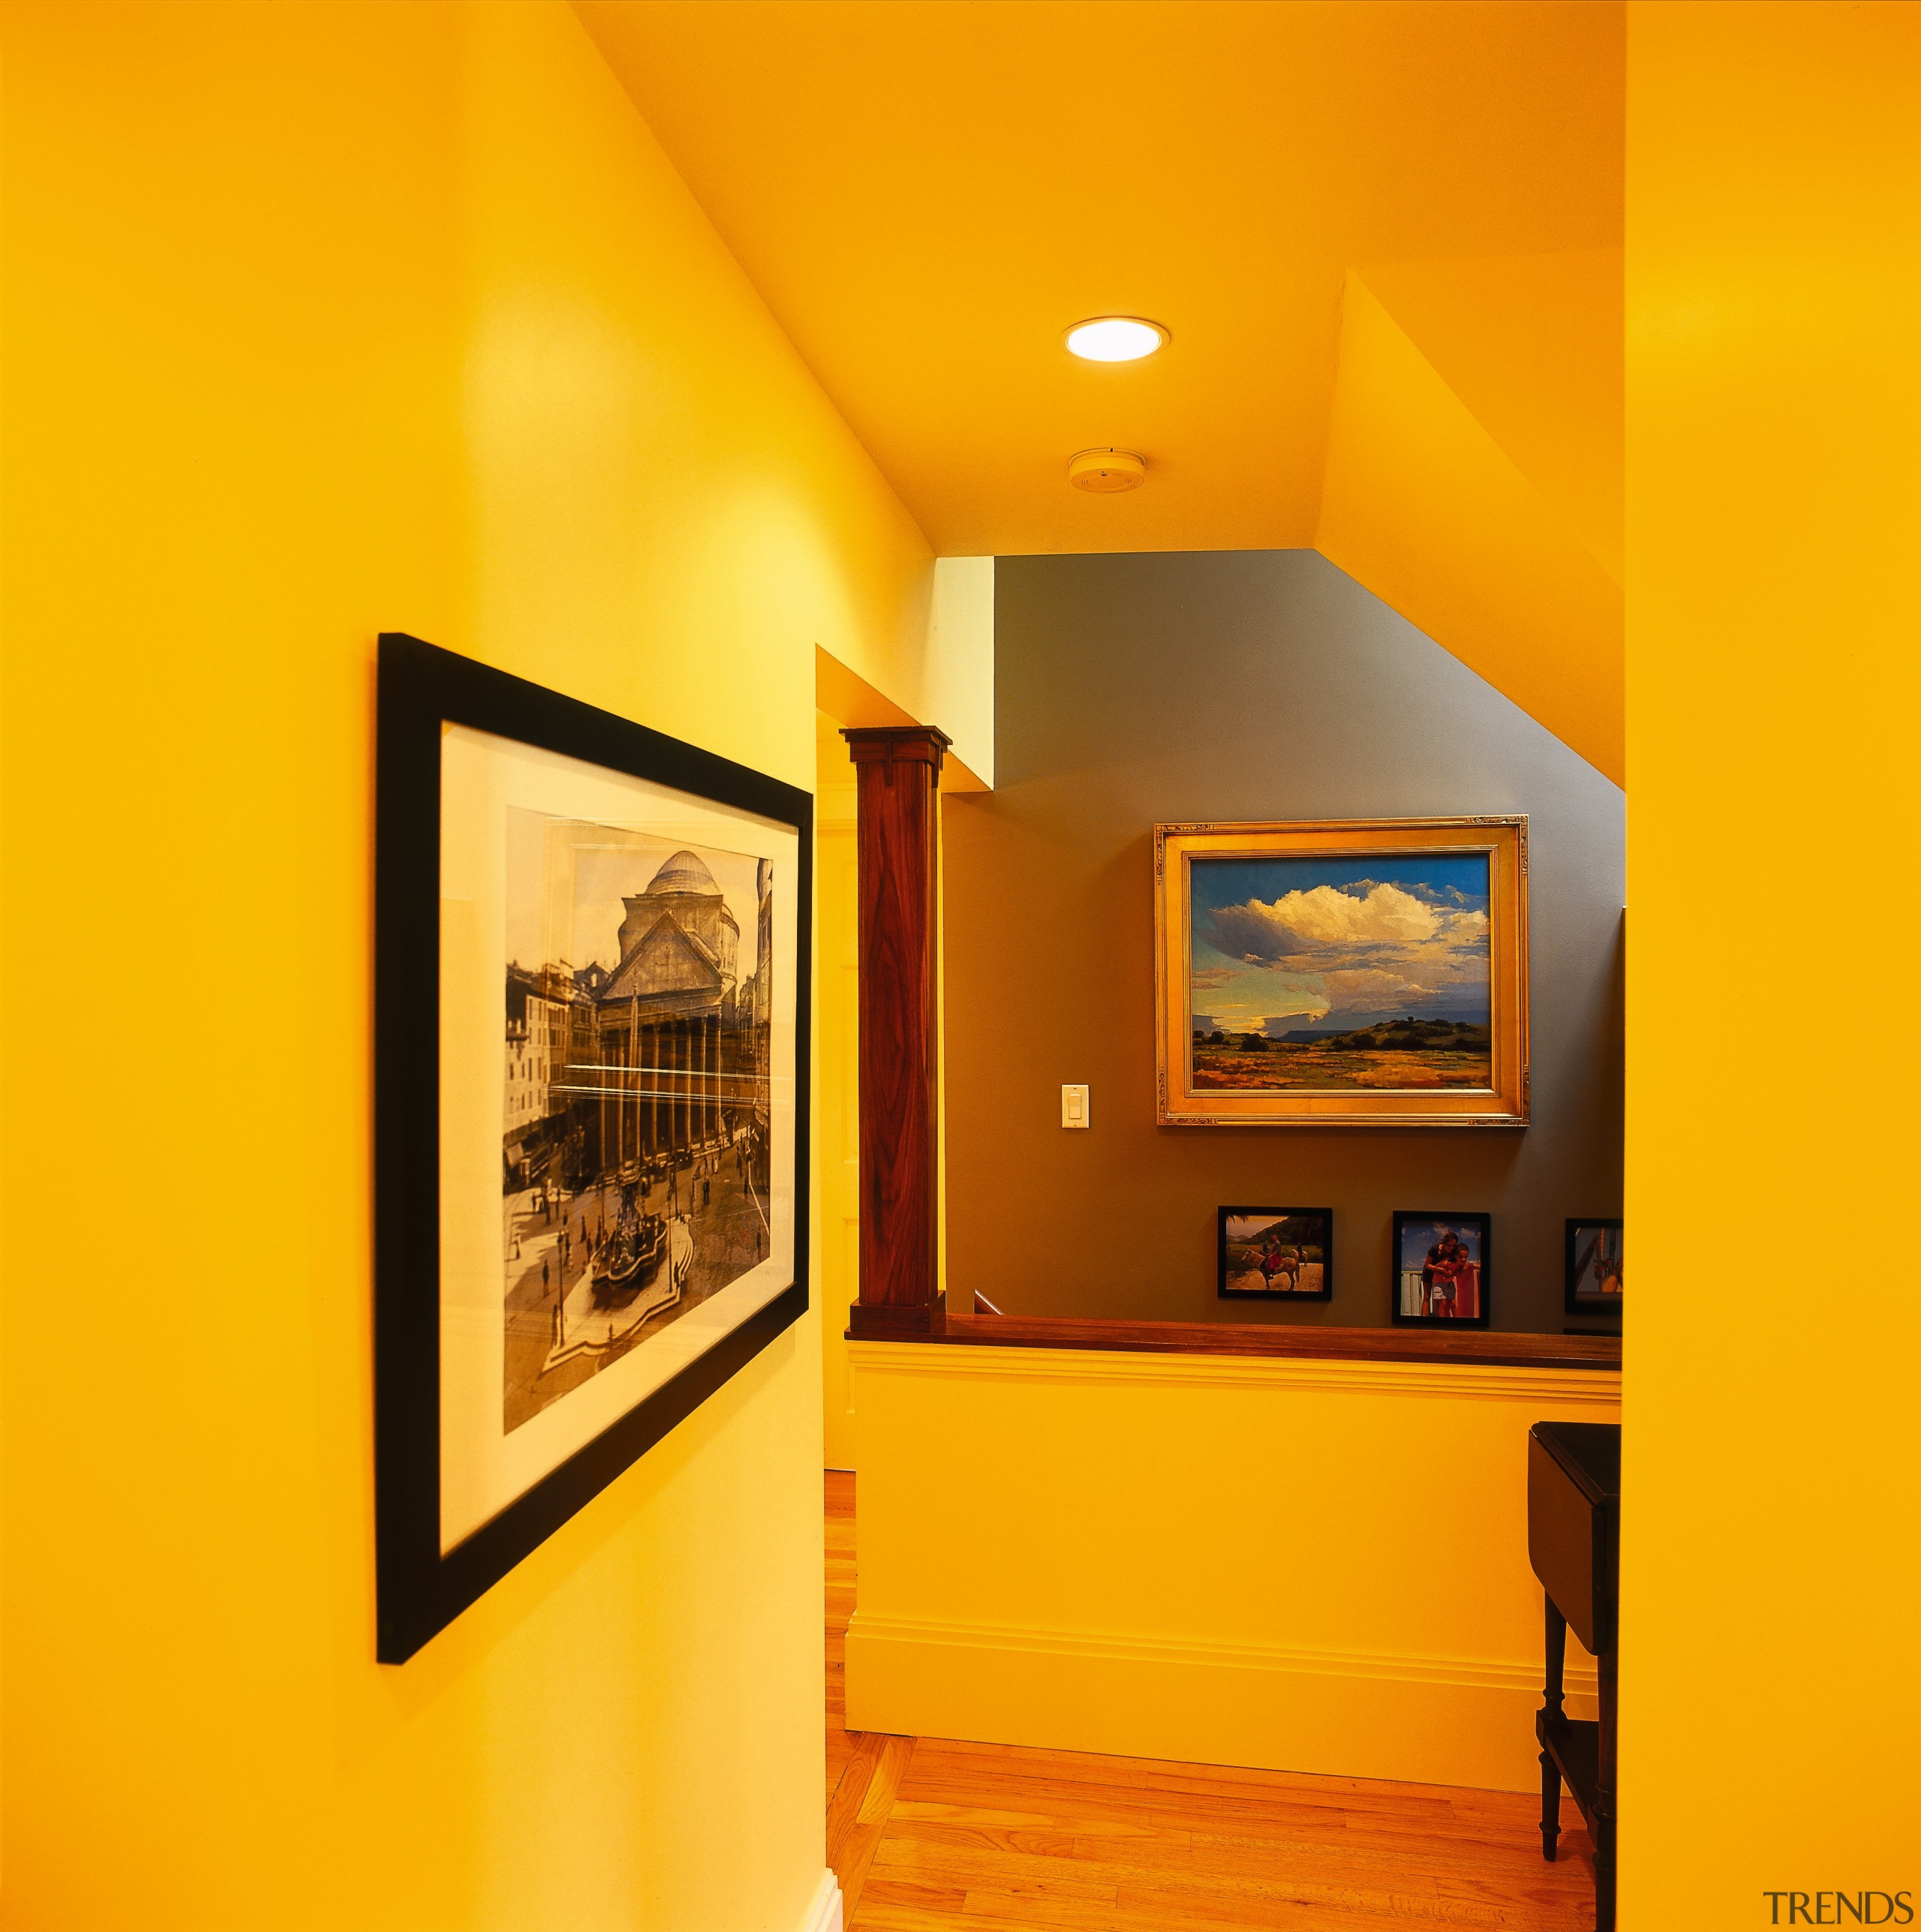 View of the yellow hall and stairwell, with architecture, ceiling, exhibition, home, house, interior design, orange, tourist attraction, wall, yellow, orange